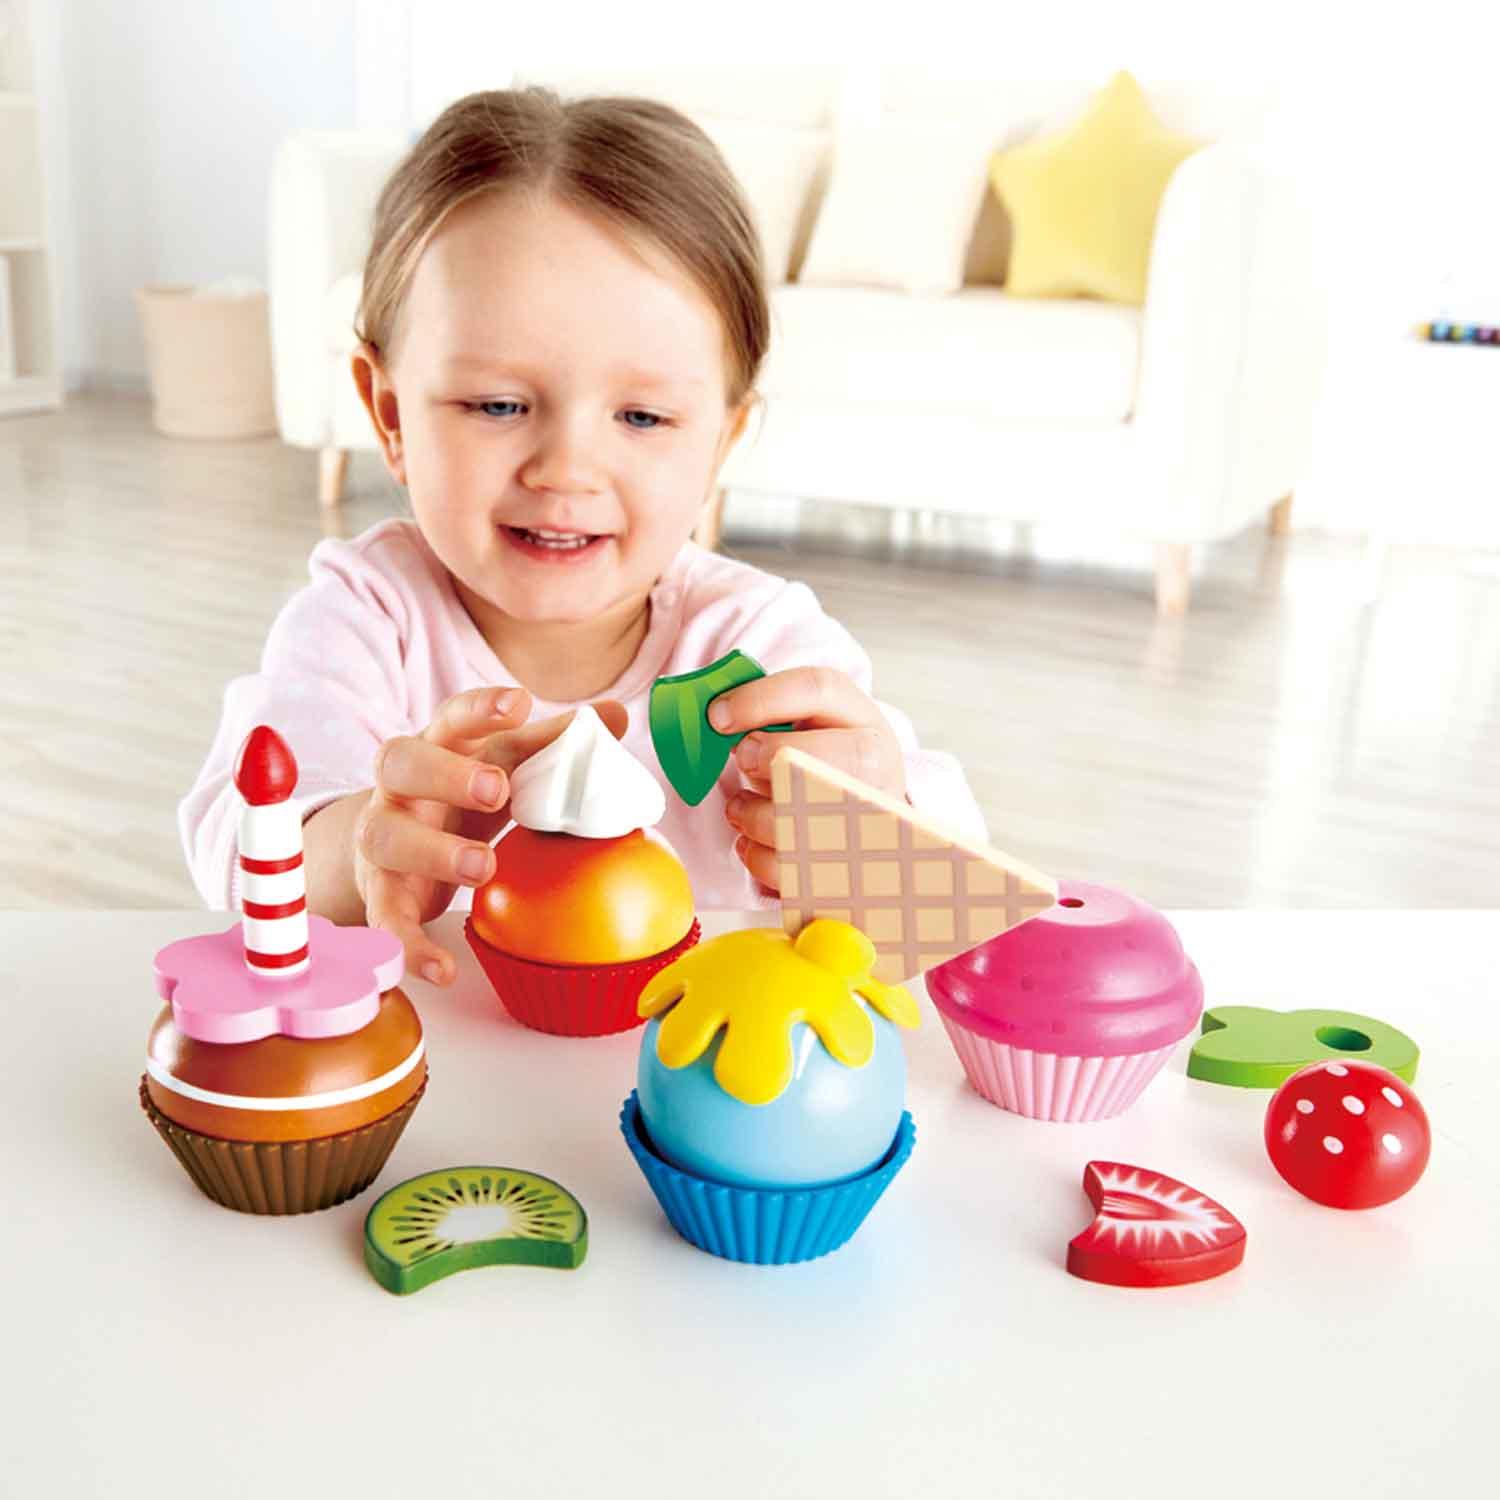 Girl playing with cupcake pieces